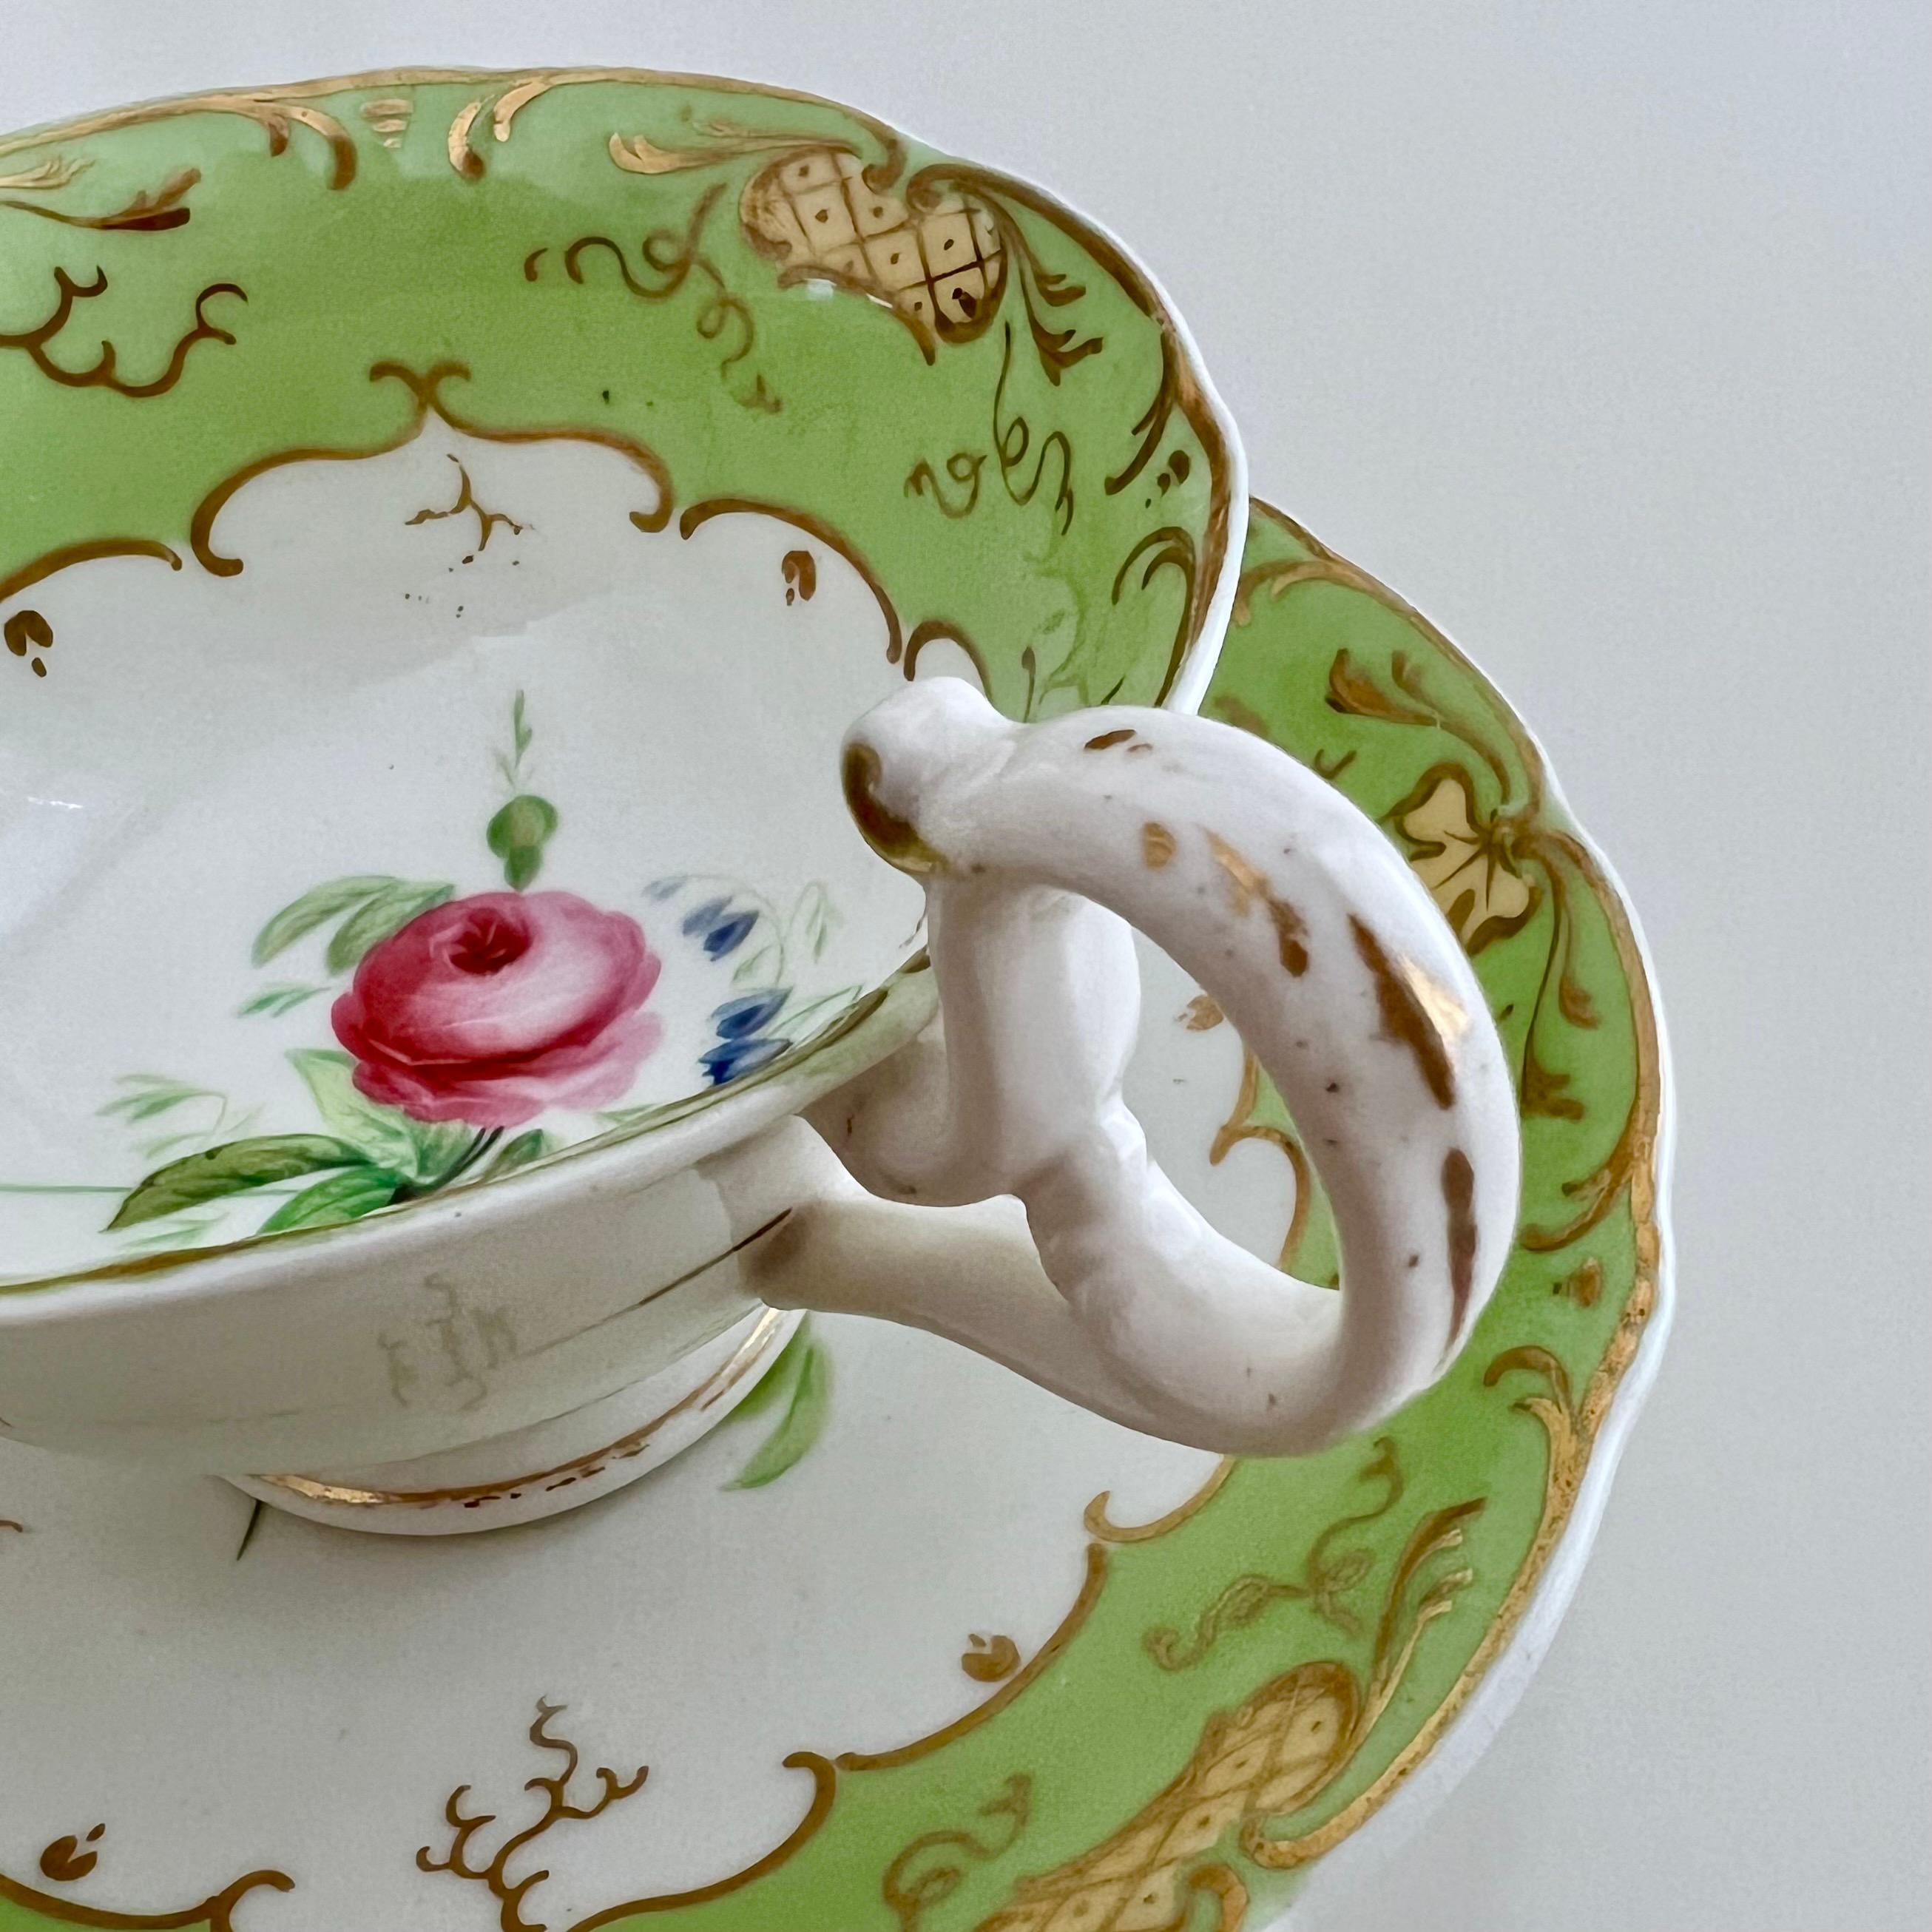 H & R Daniel Porcelain Teacup, Apple Green with Pink Roses, Rococo Revival C1840 6